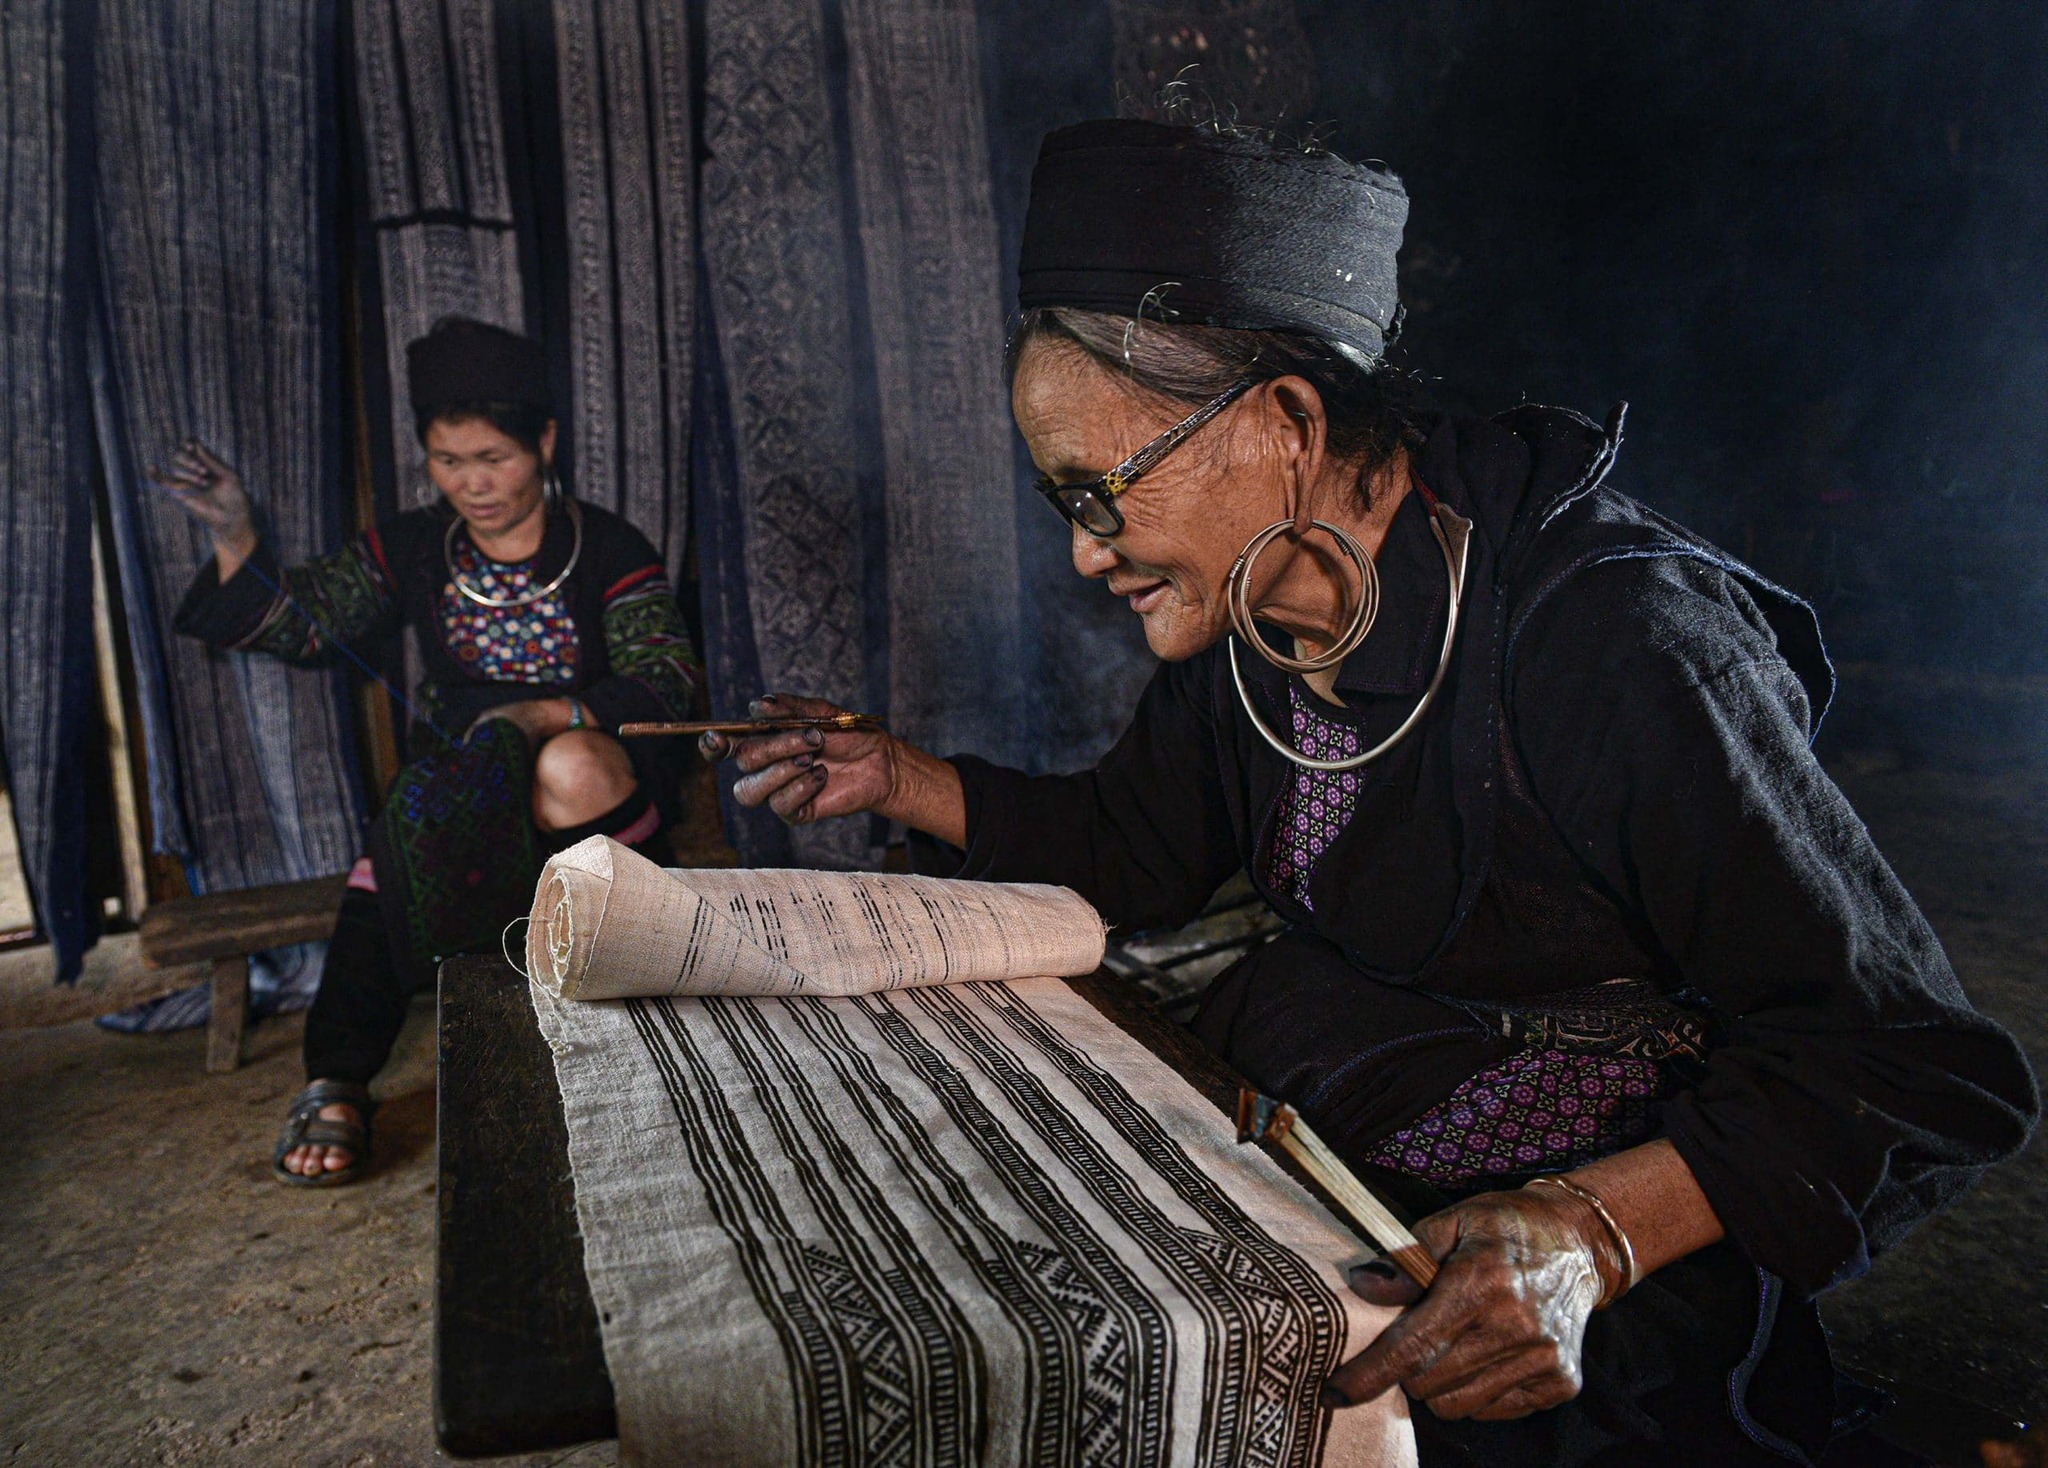 The stunning art of the Hmong people